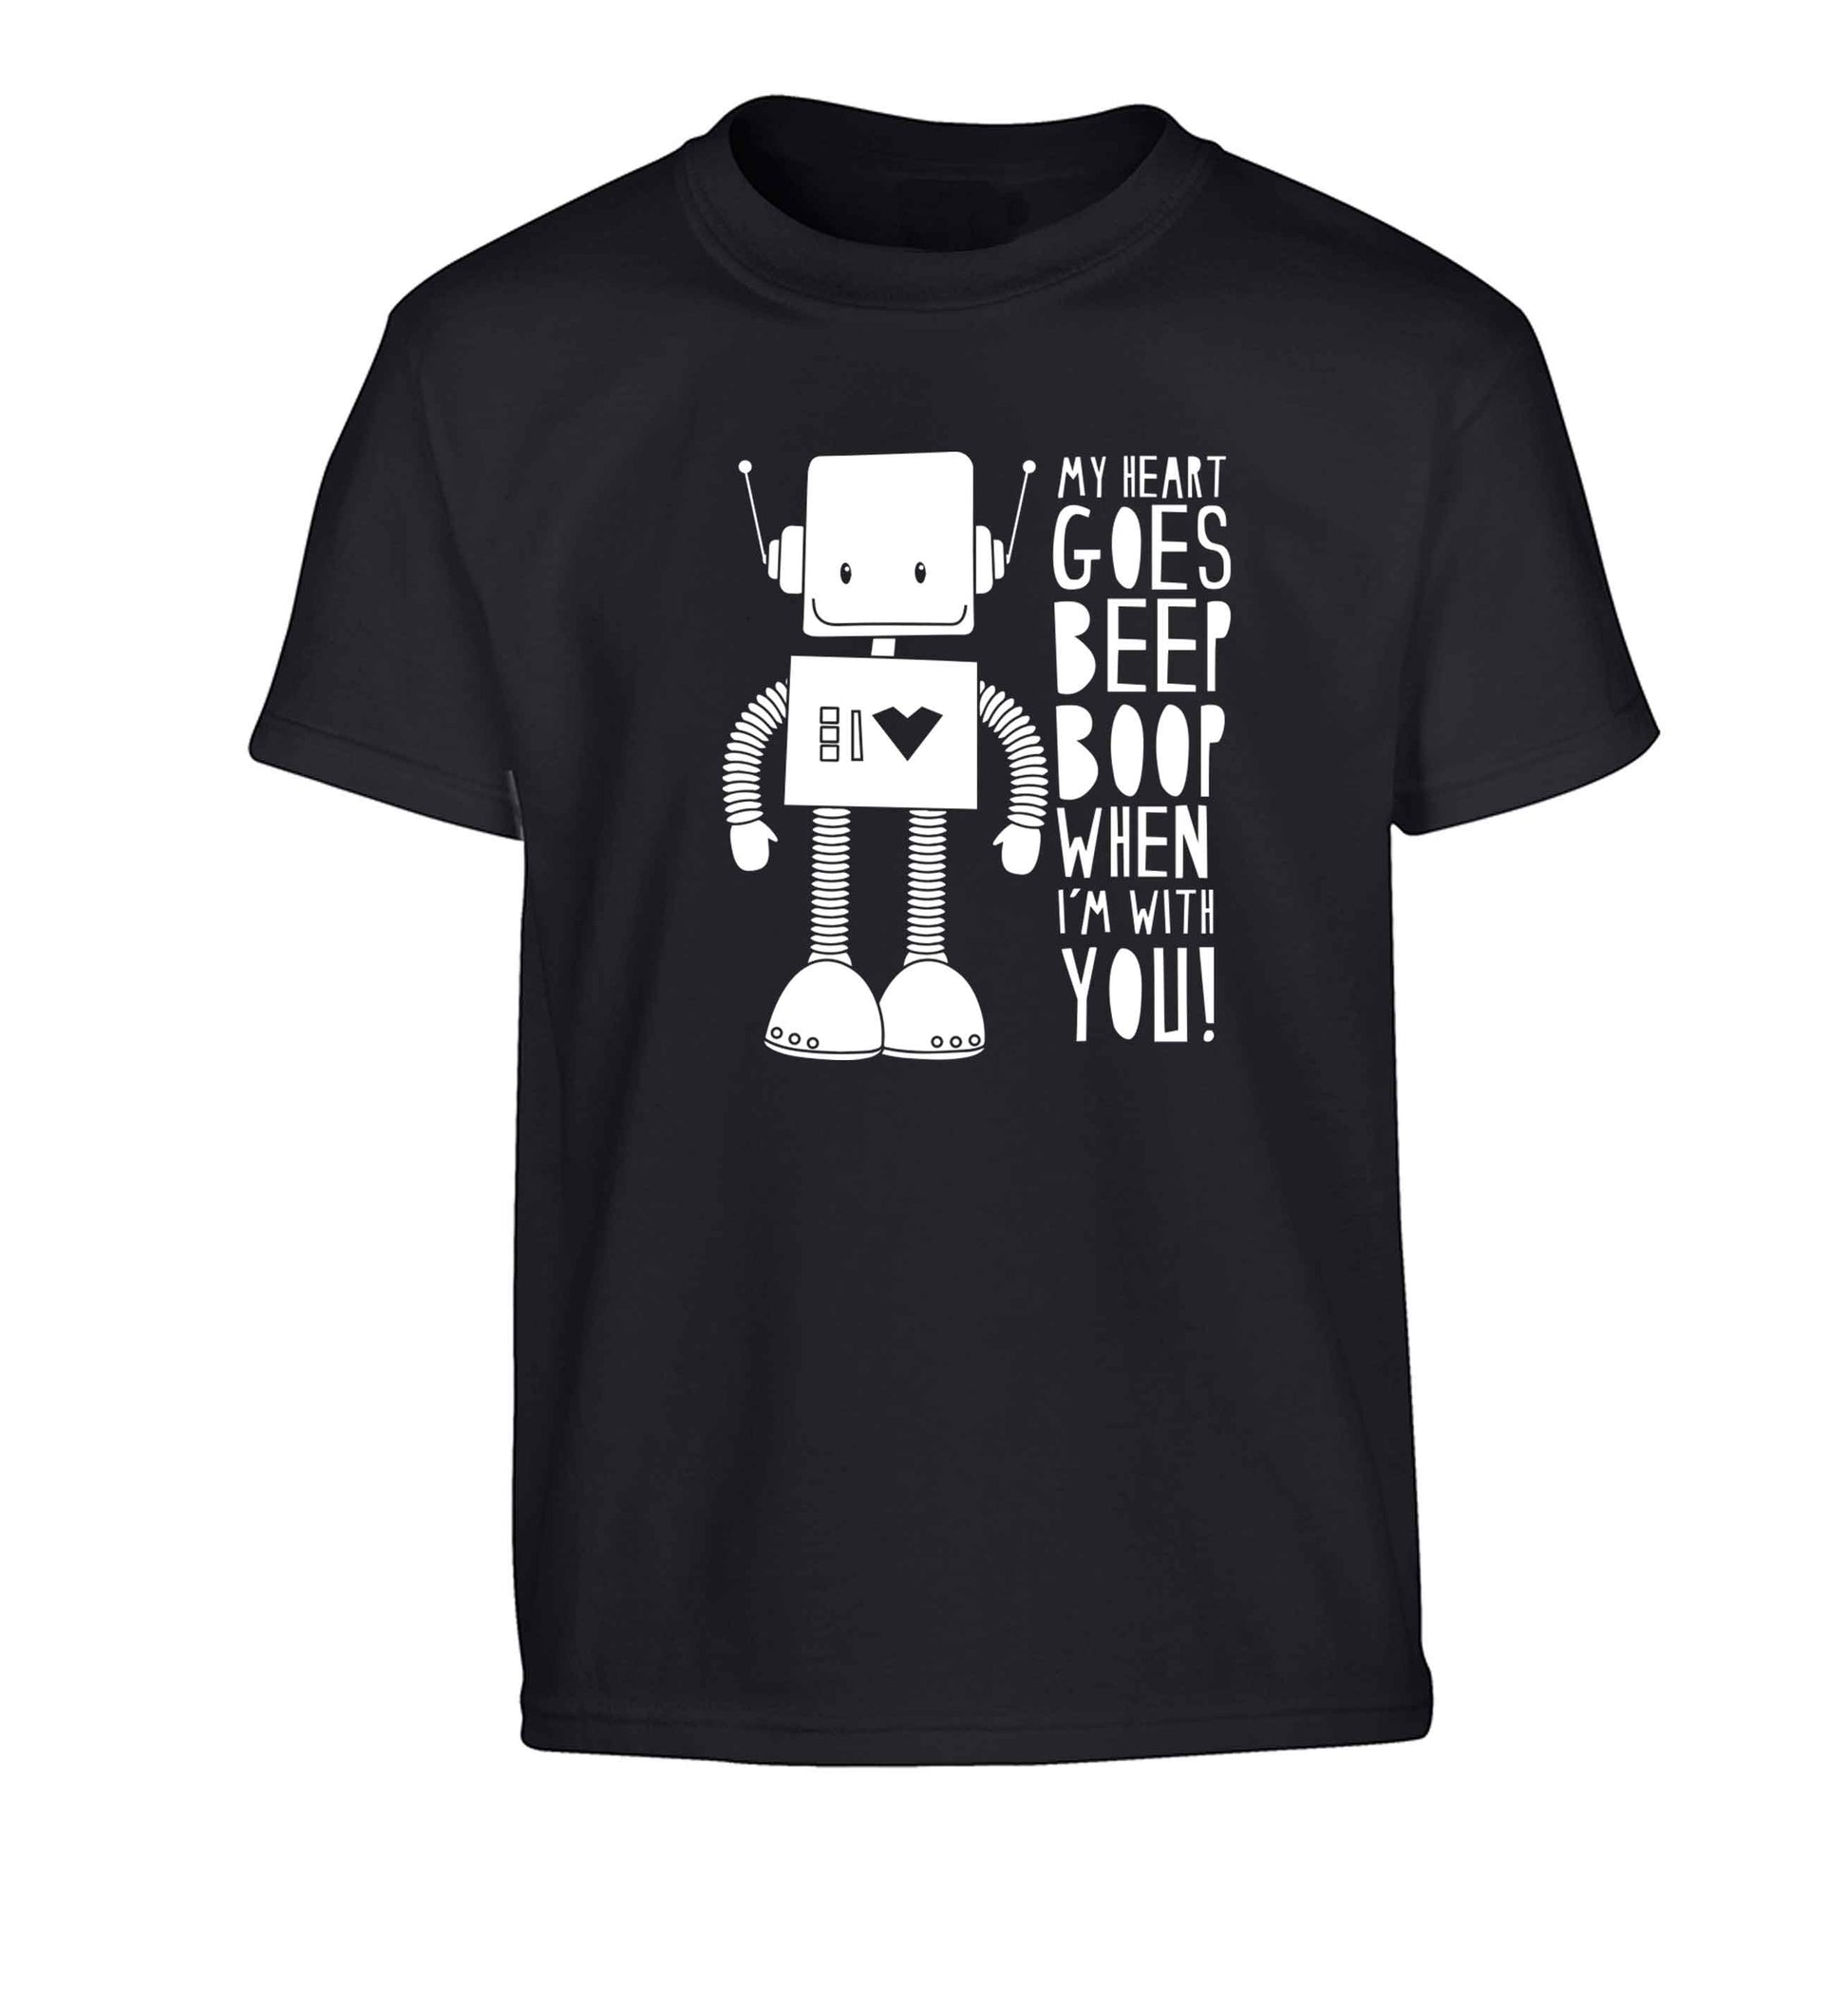 My heart goes beep boop when I'm with you Children's black Tshirt 12-13 Years